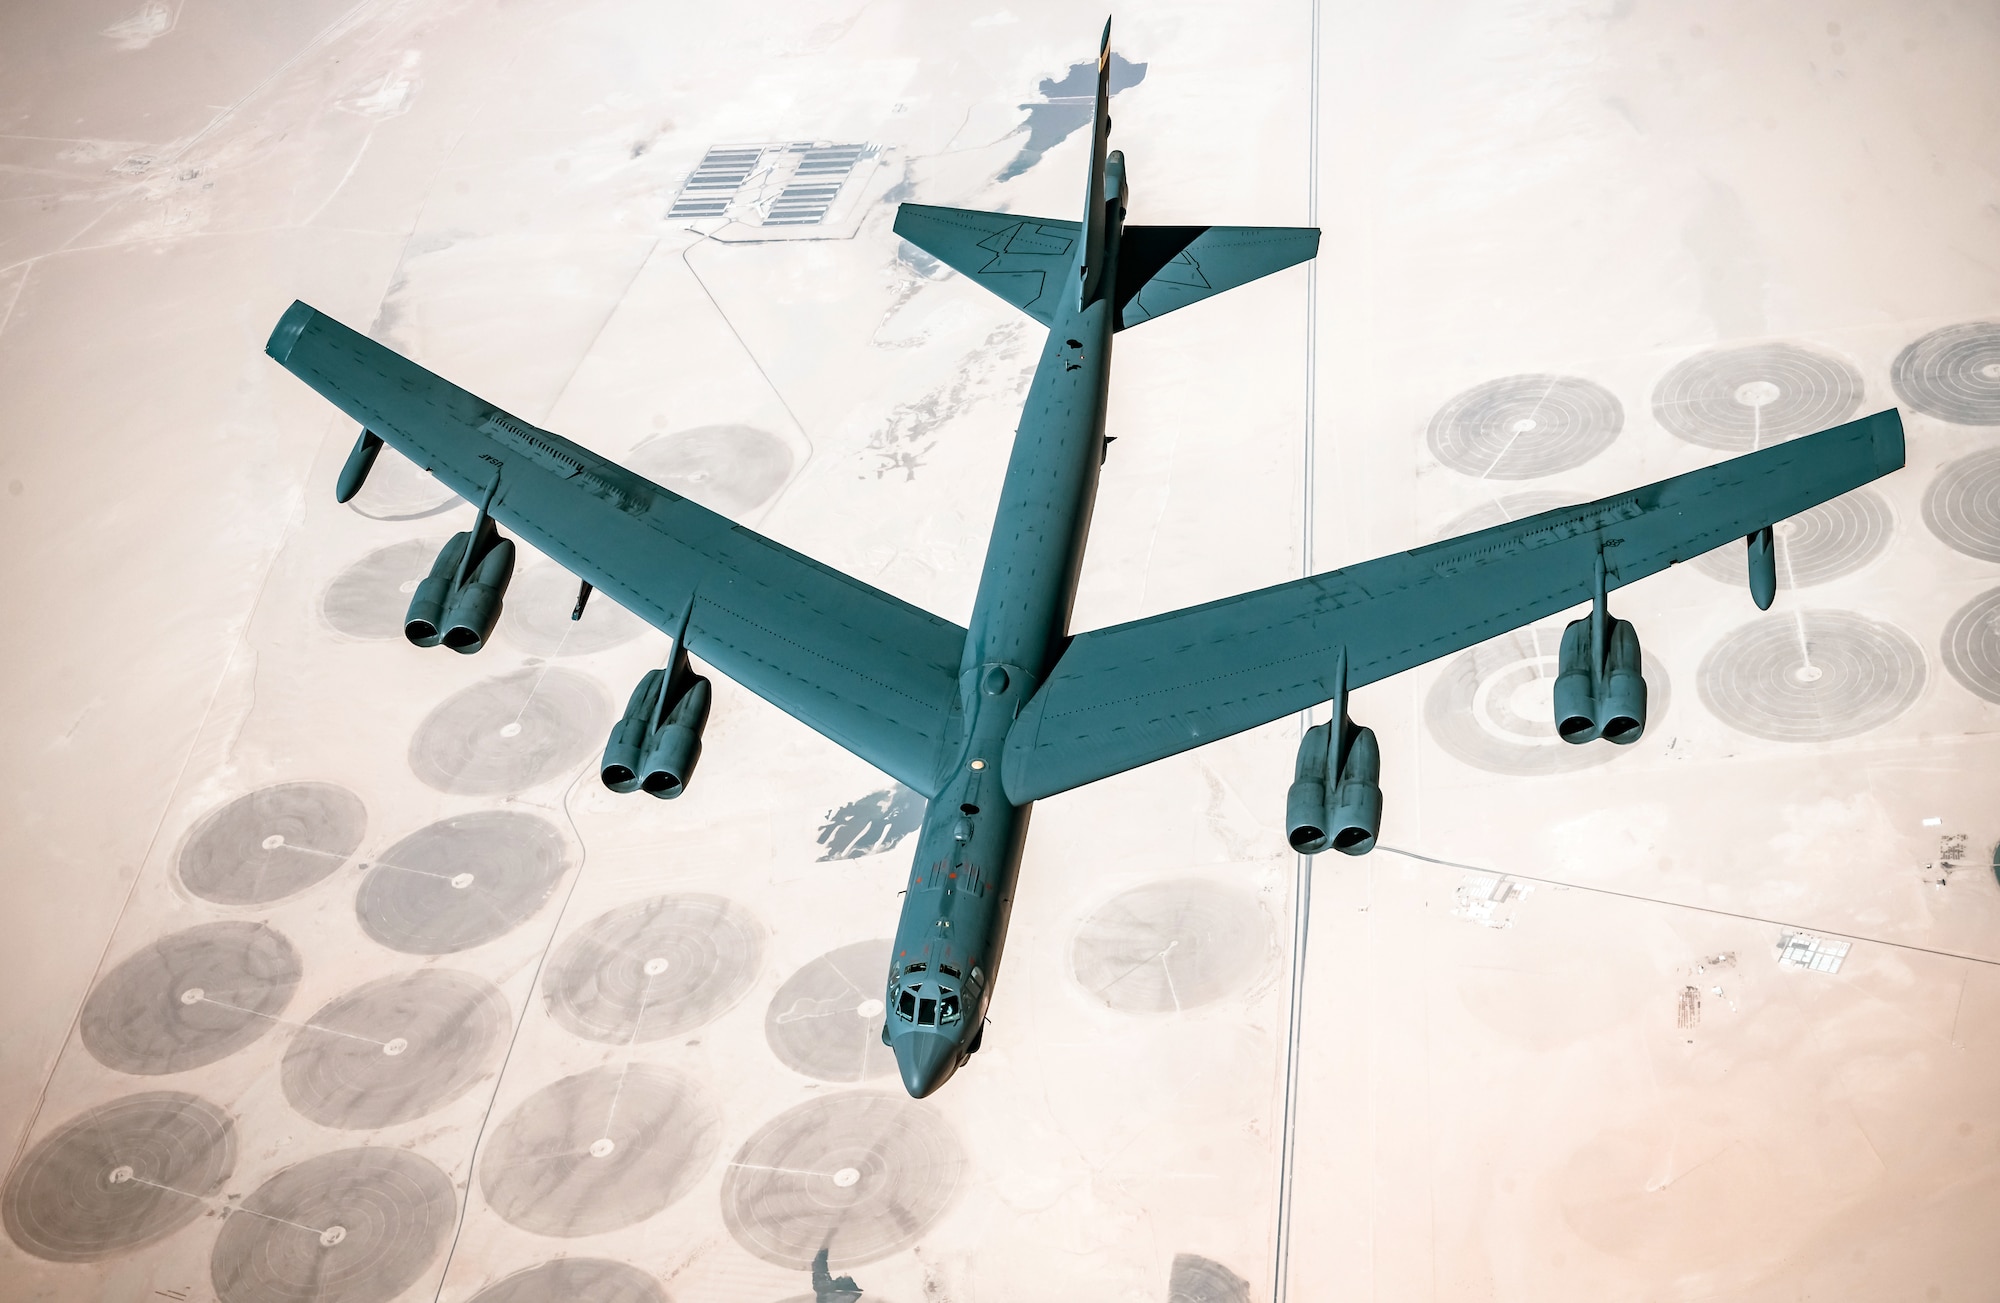 A U.S. Air Force B-52 Stratofortress from the 5th Bomb Wing, Minot Air Force Base, N.D., departs after receiving fuel from a U.S. Air Force KC-135 Stratotanker